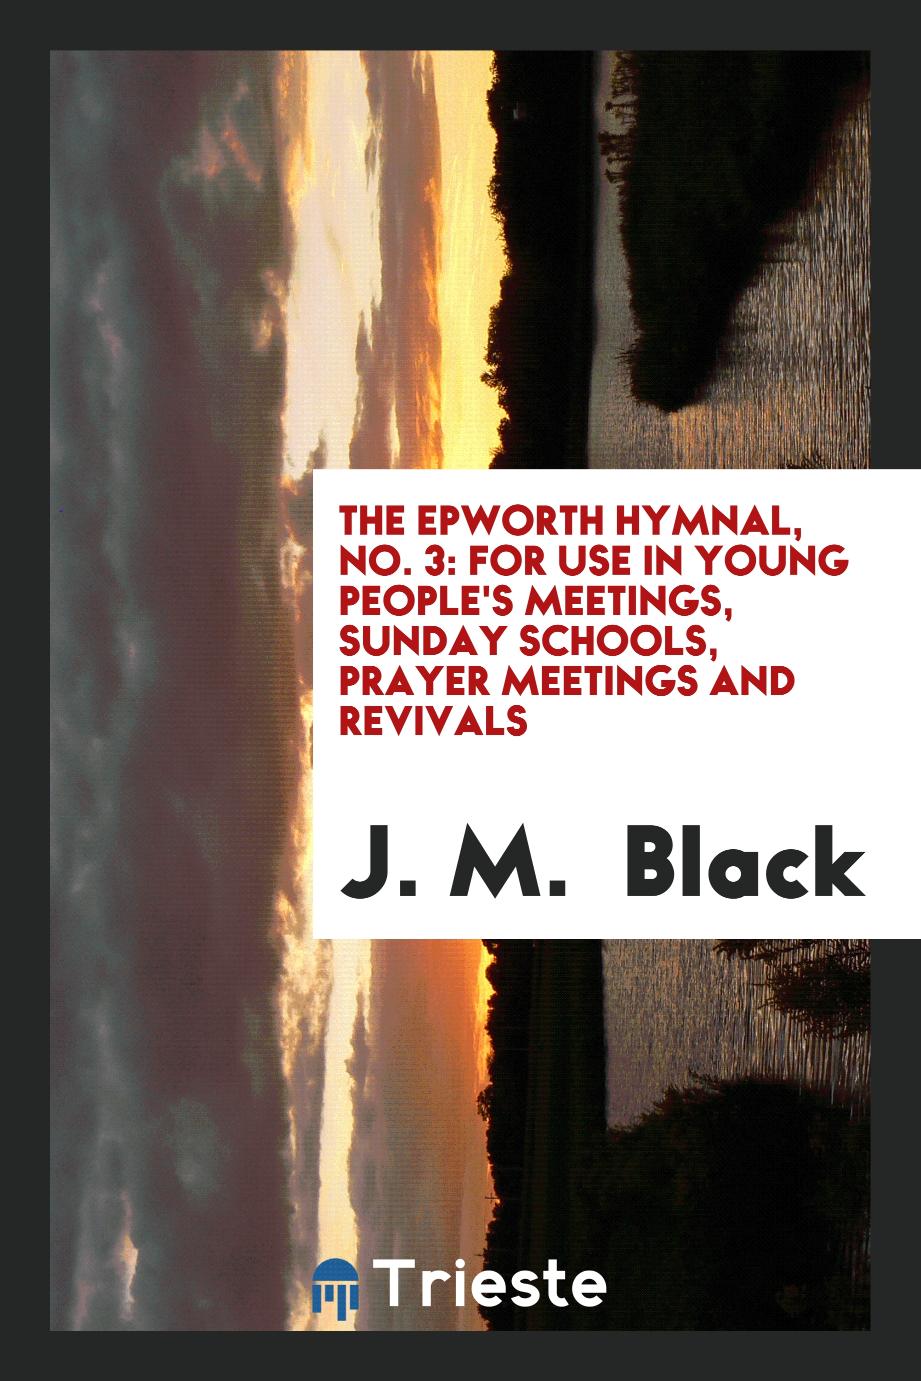 The Epworth Hymnal, No. 3: For Use in Young People's Meetings, Sunday Schools, Prayer Meetings and Revivals